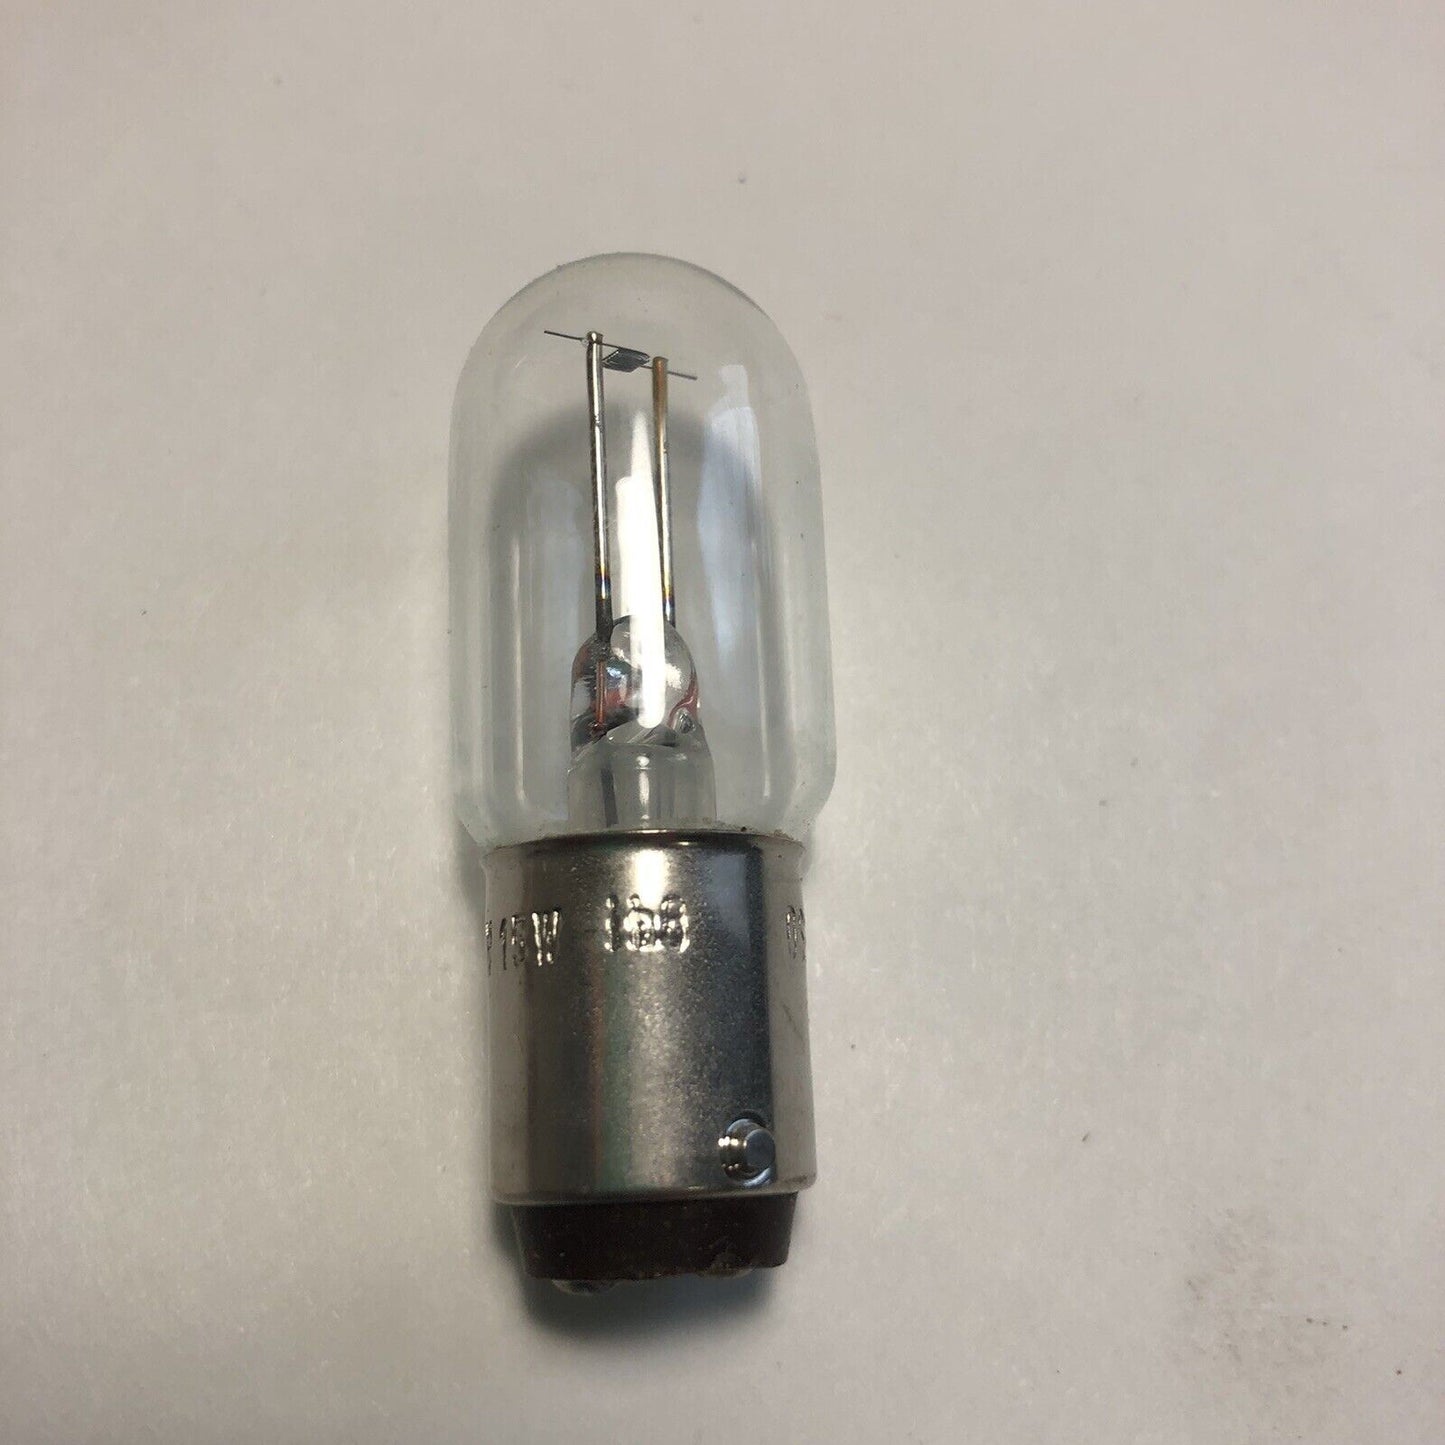 OSRAM 8018 6V15W Microscope Measuring Replacement Bulb